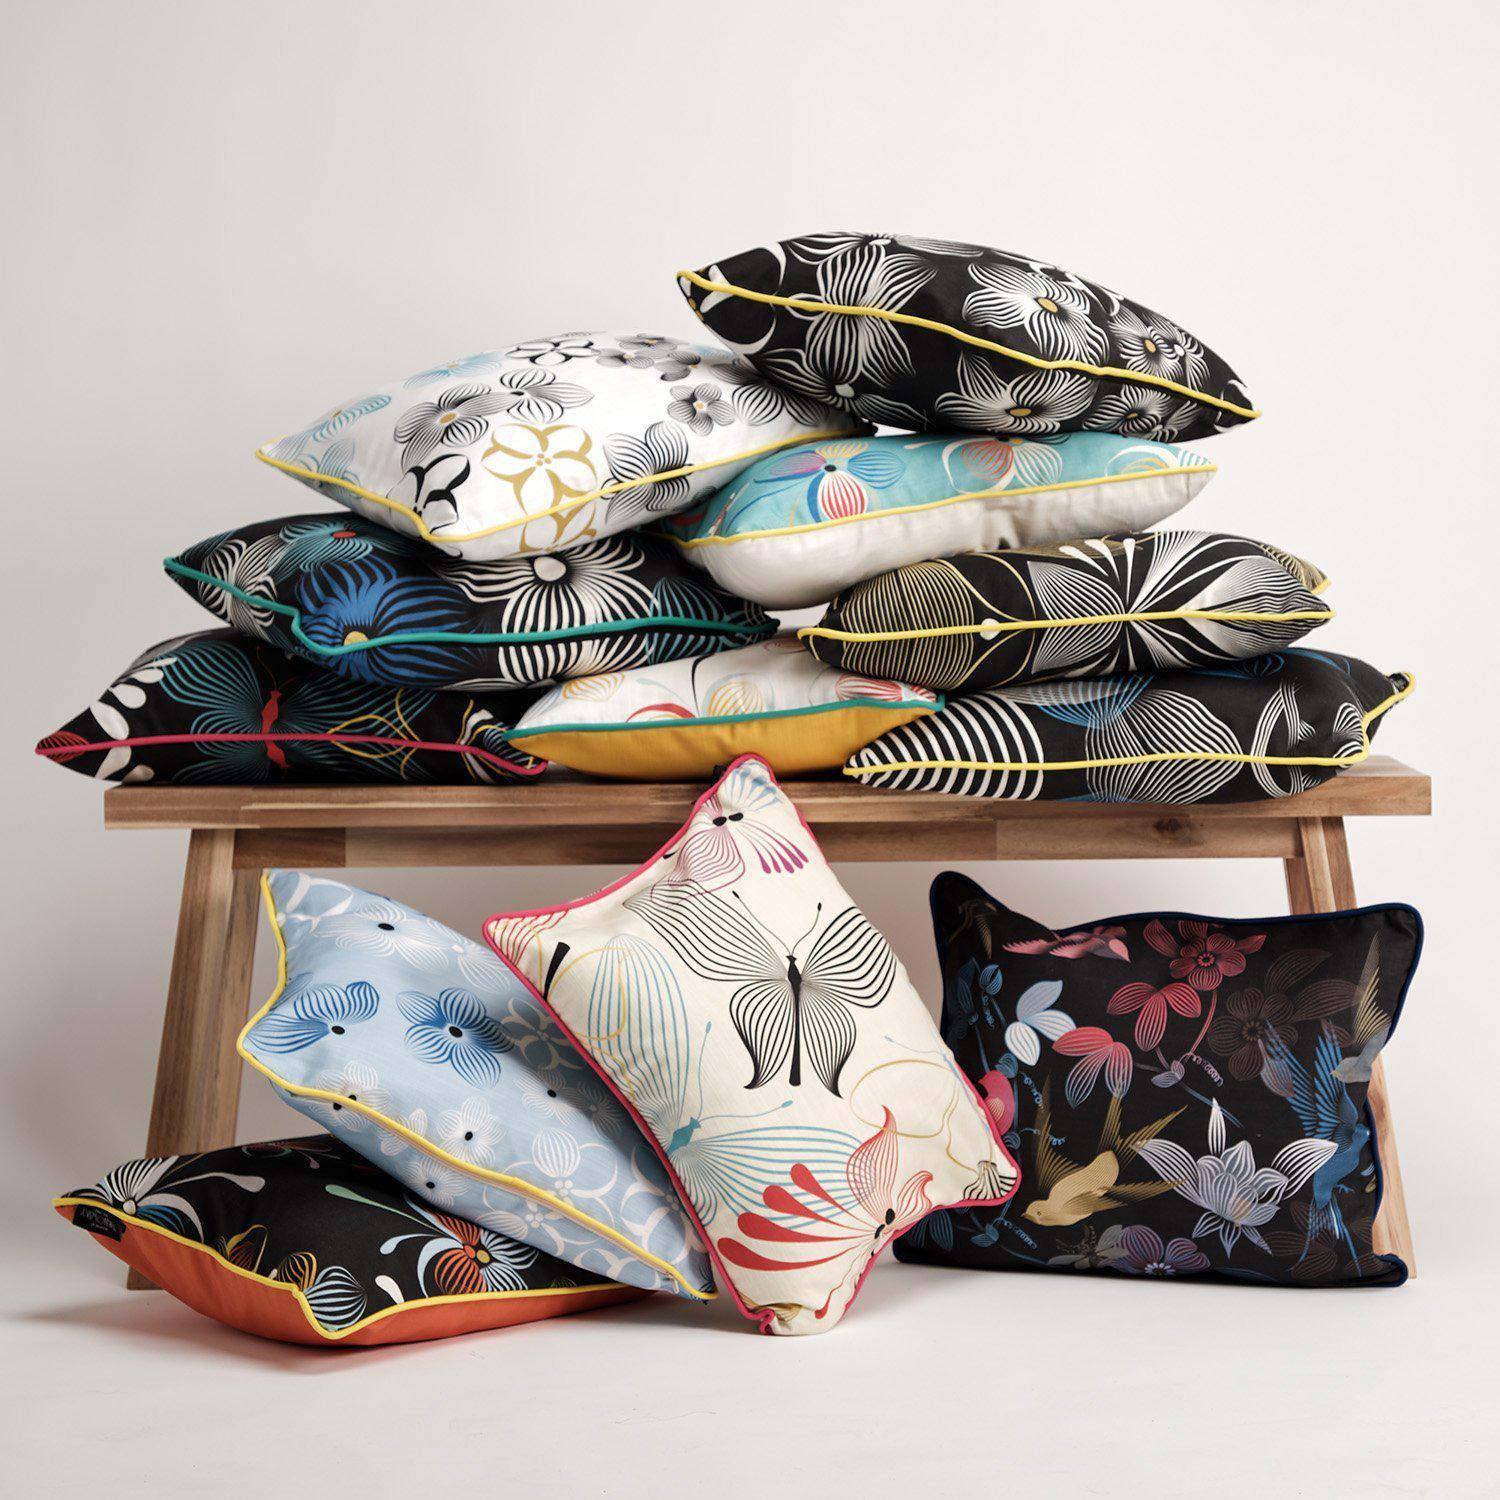 Exotic Butterflies ( Black) - Funky Art Cushion - Perfect Day - House Of Turnowsky Pillows - Handmade Cushions UK - WeLoveCushions